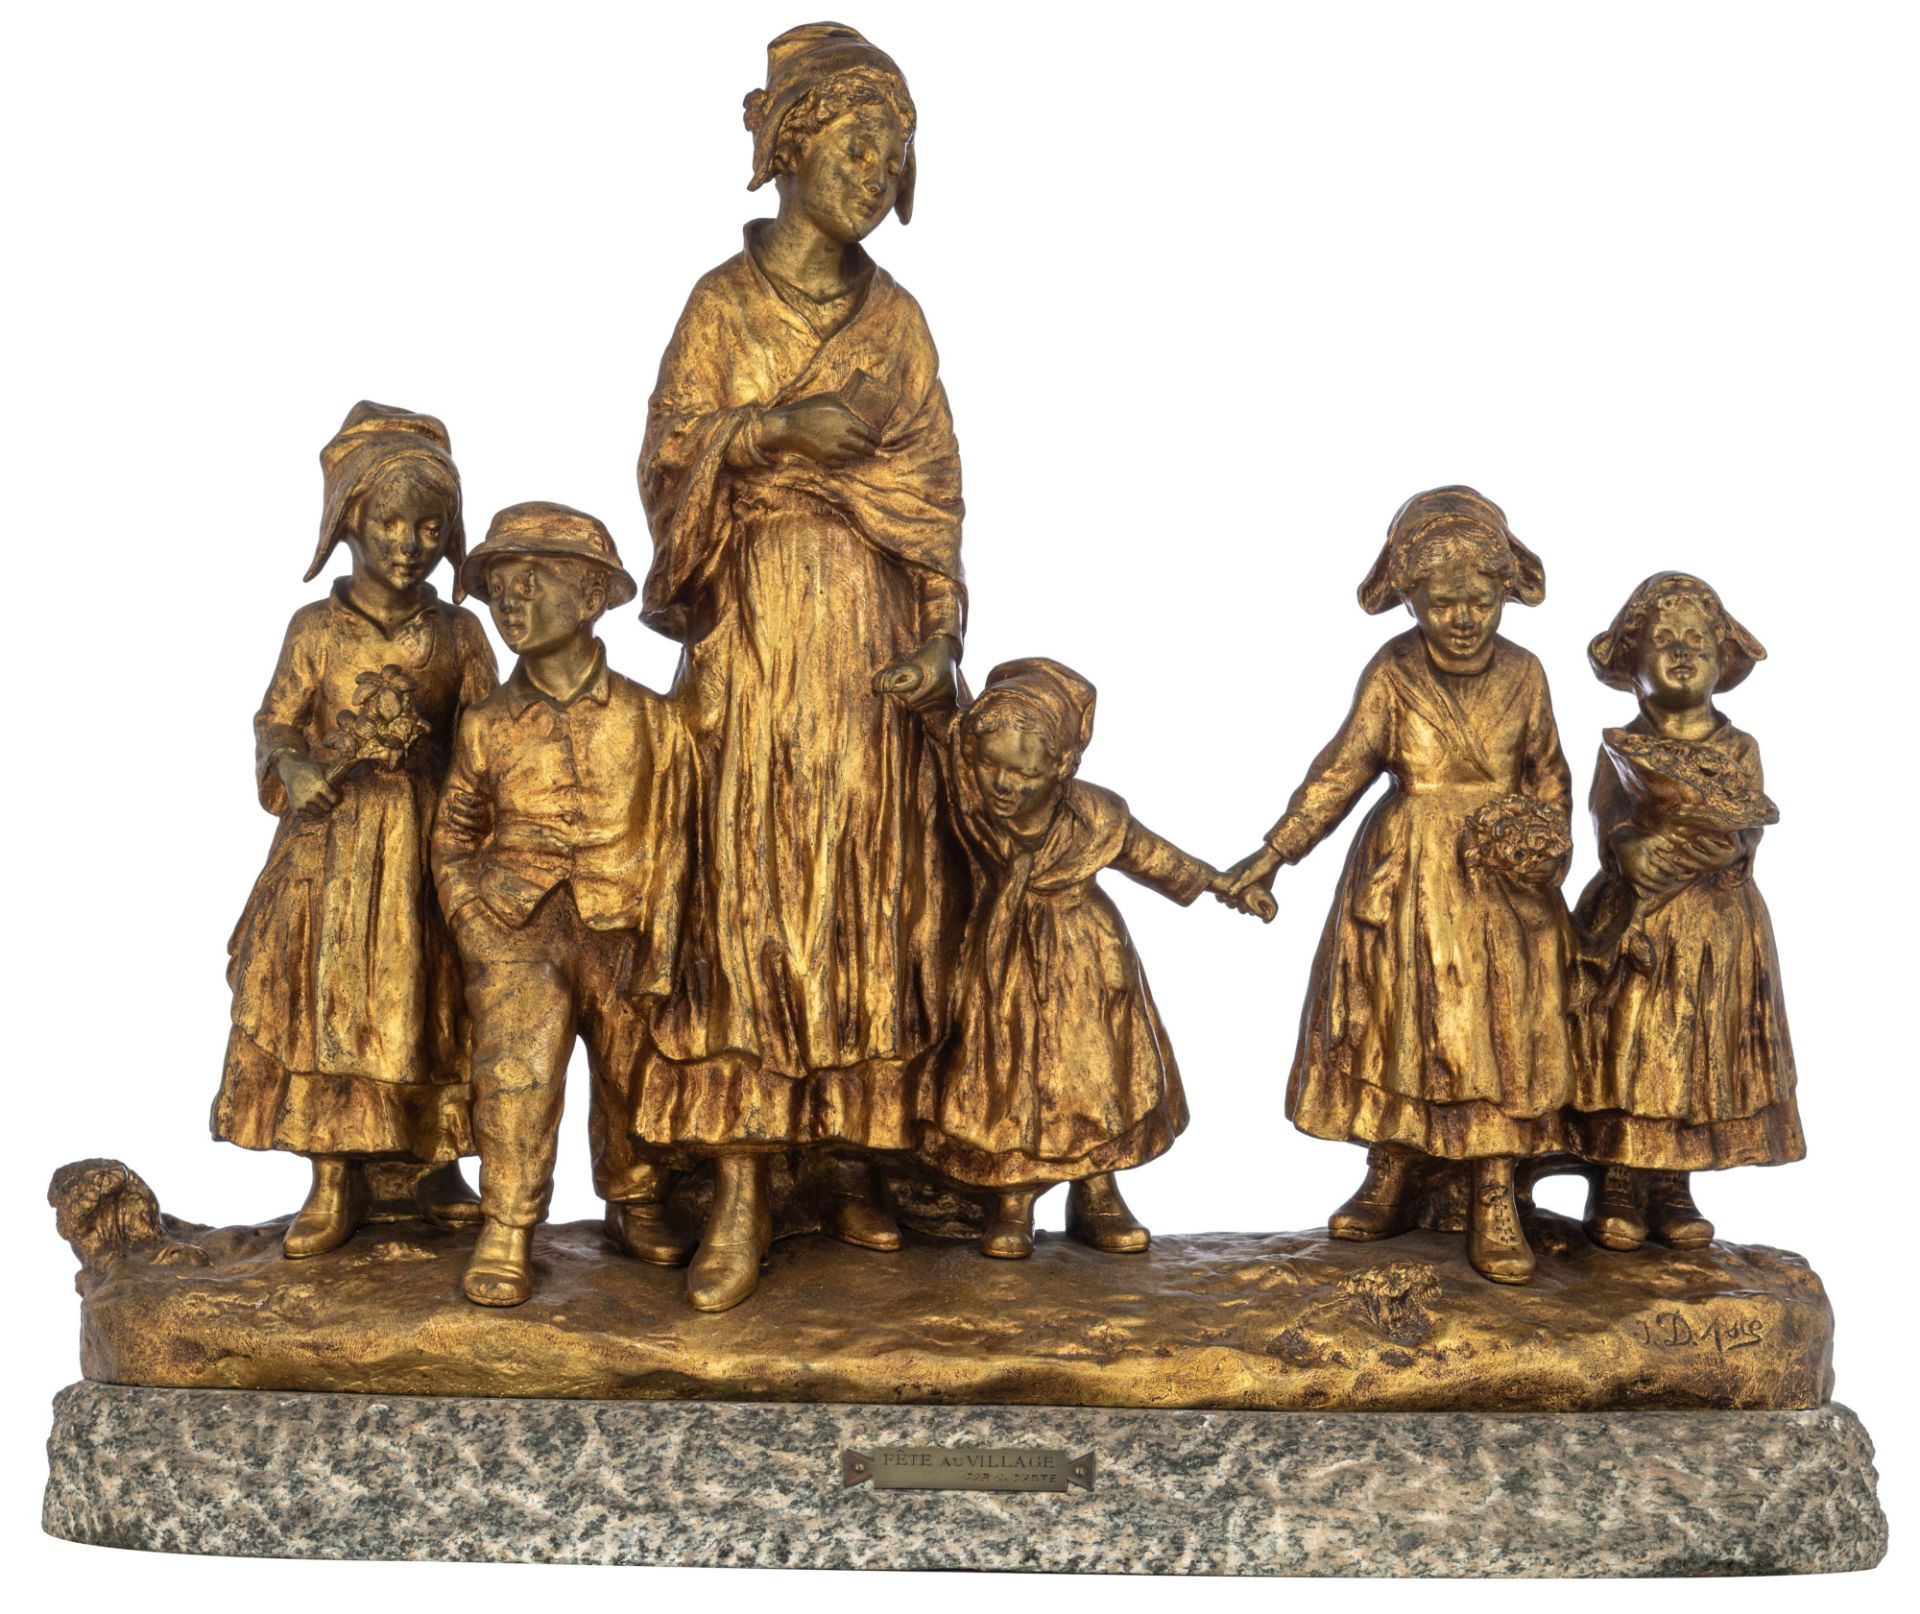 D'Aste J., 'Fˆte au village', gilt and patinated bronze, on a rough green marble base, H (with base)